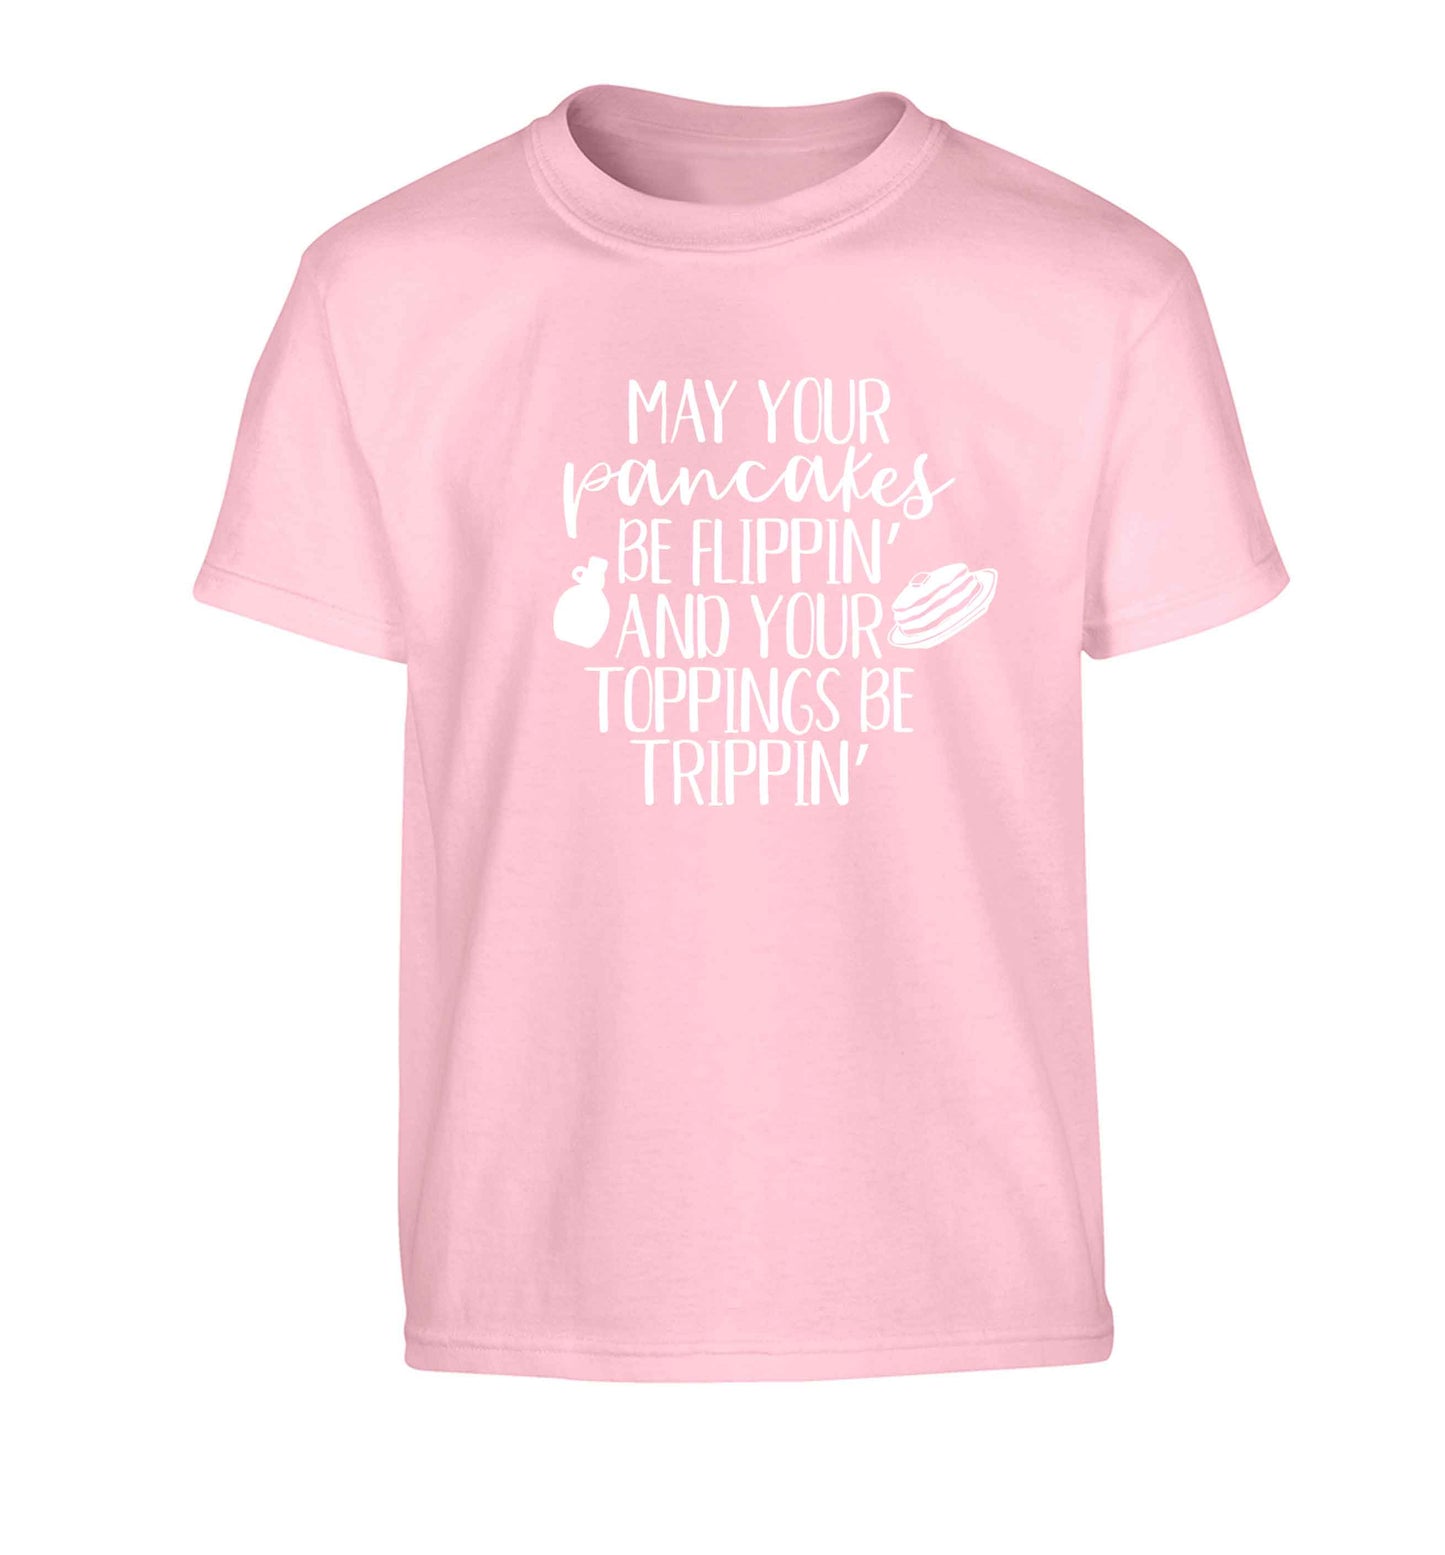 May your pancakes be flippin' and your toppings be trippin' Children's light pink Tshirt 12-13 Years